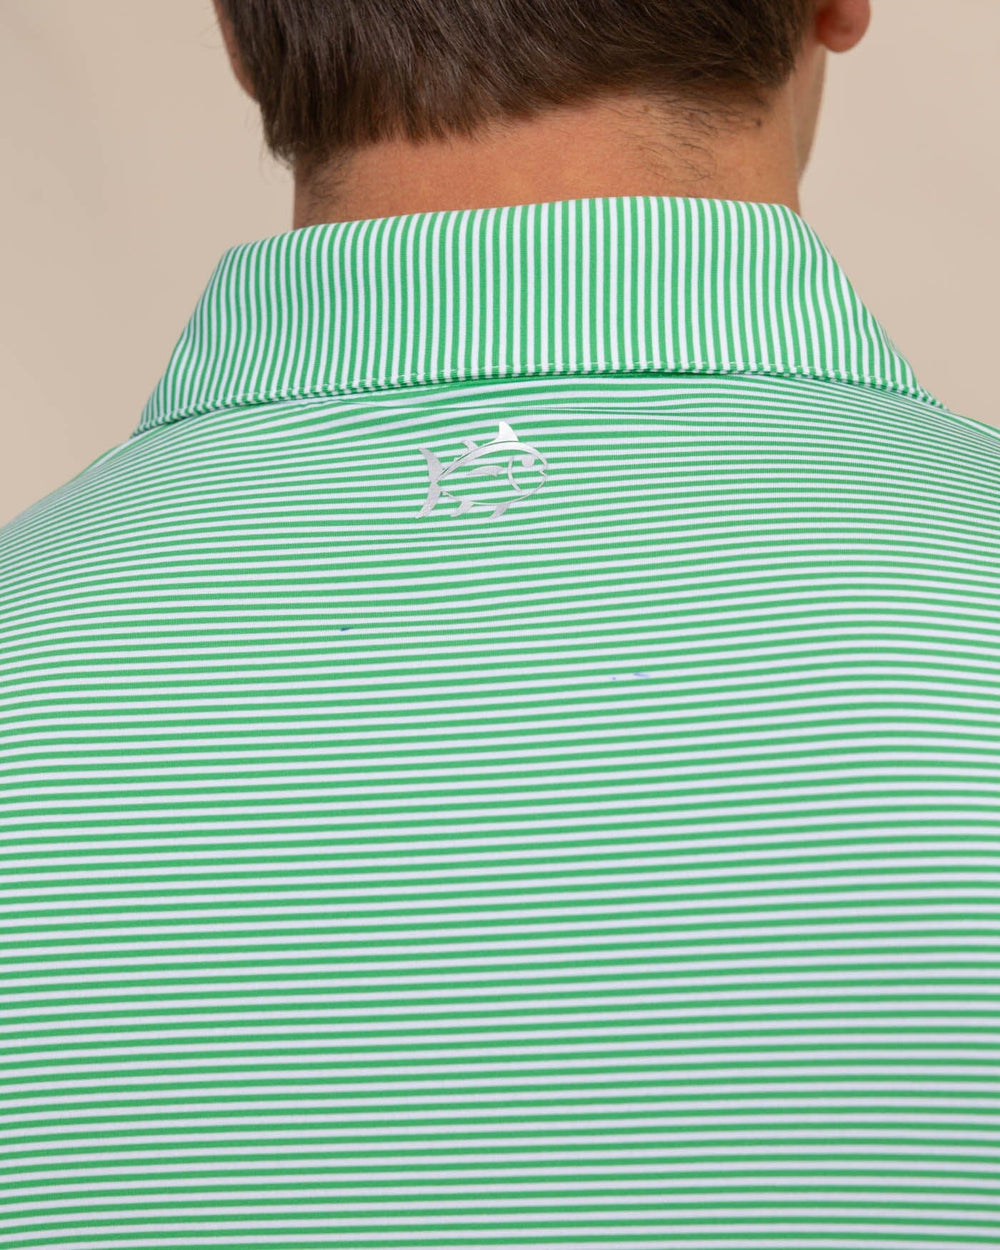 The detail view of the Southern Tide brrr-eeze-meadowbrook-stripe-polo by Southern Tide - Lawn Green